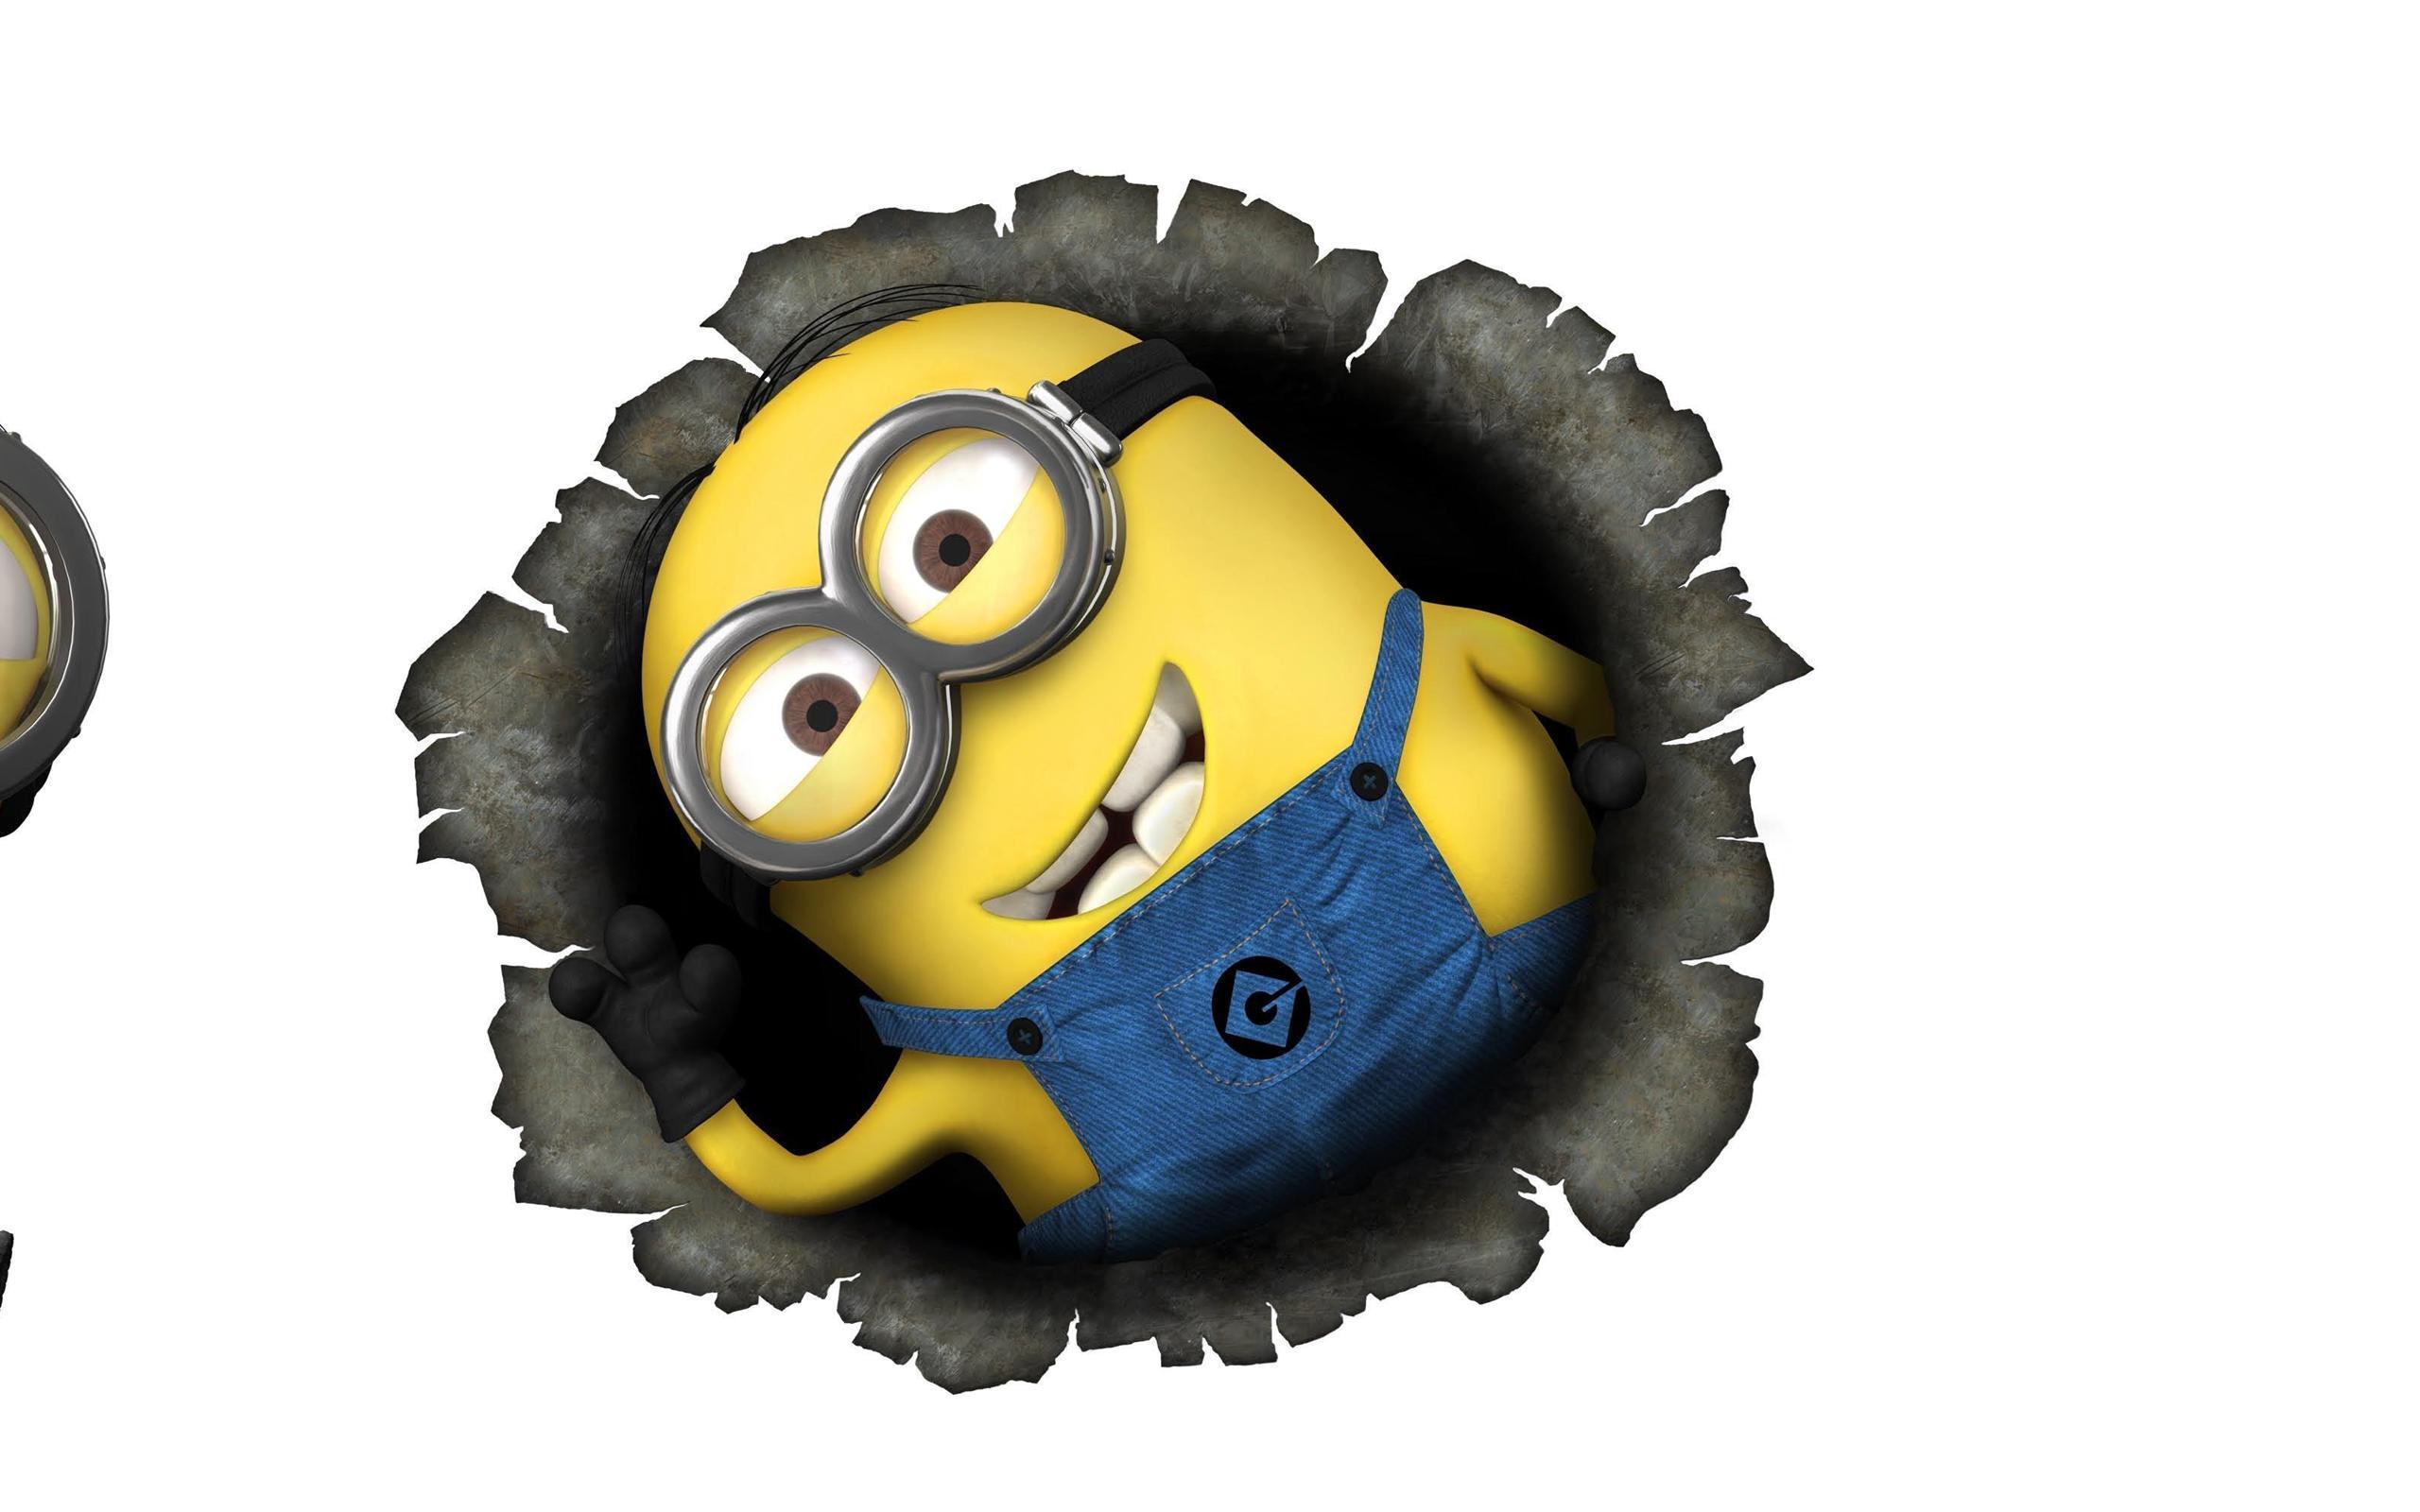 Minions Despicable Me Wallpaper For Free Download